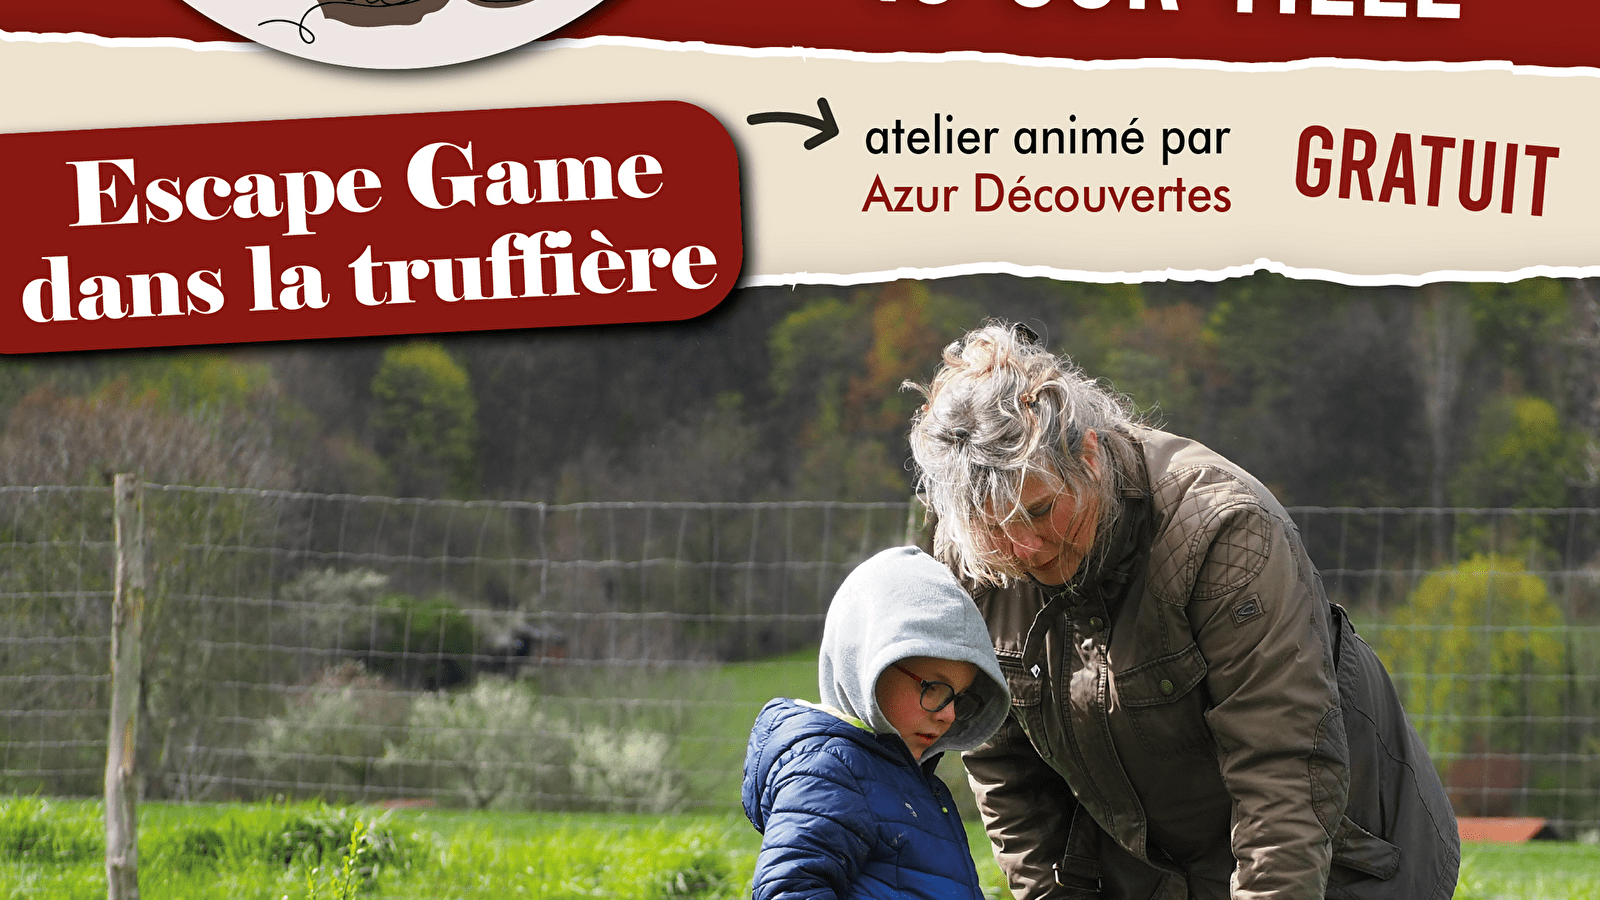 Activities at the truffle farm: Escape Game in the truffle farm